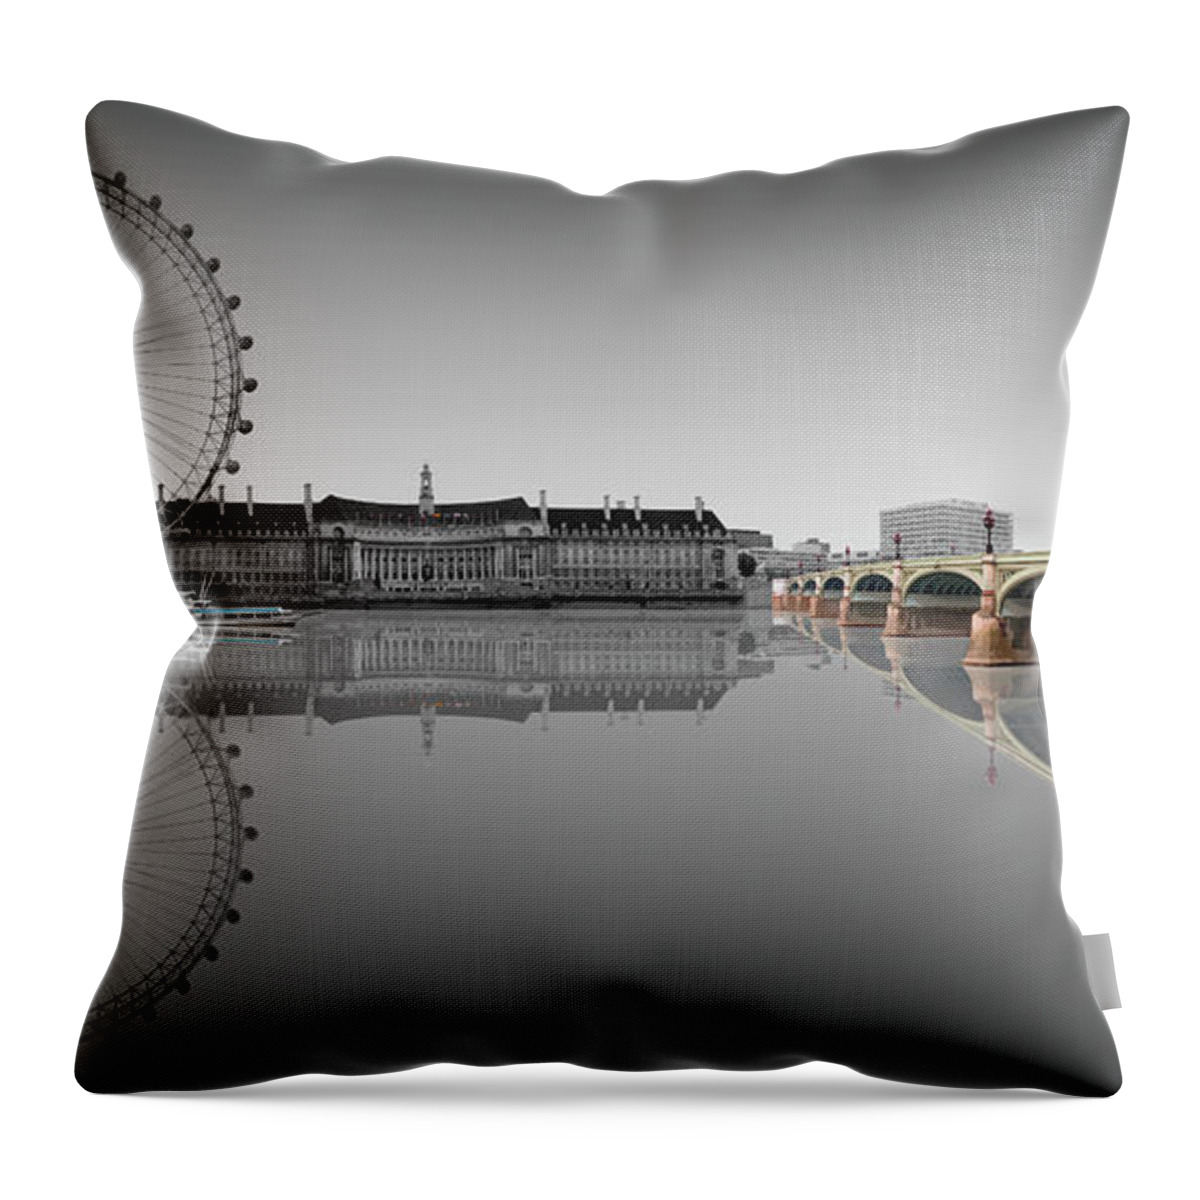 London Eye Westminster Bridge Reflection Black And White Throw Pillow featuring the digital art London Eye Westminster Bridge Reflection Black and White by Joe Tamassy